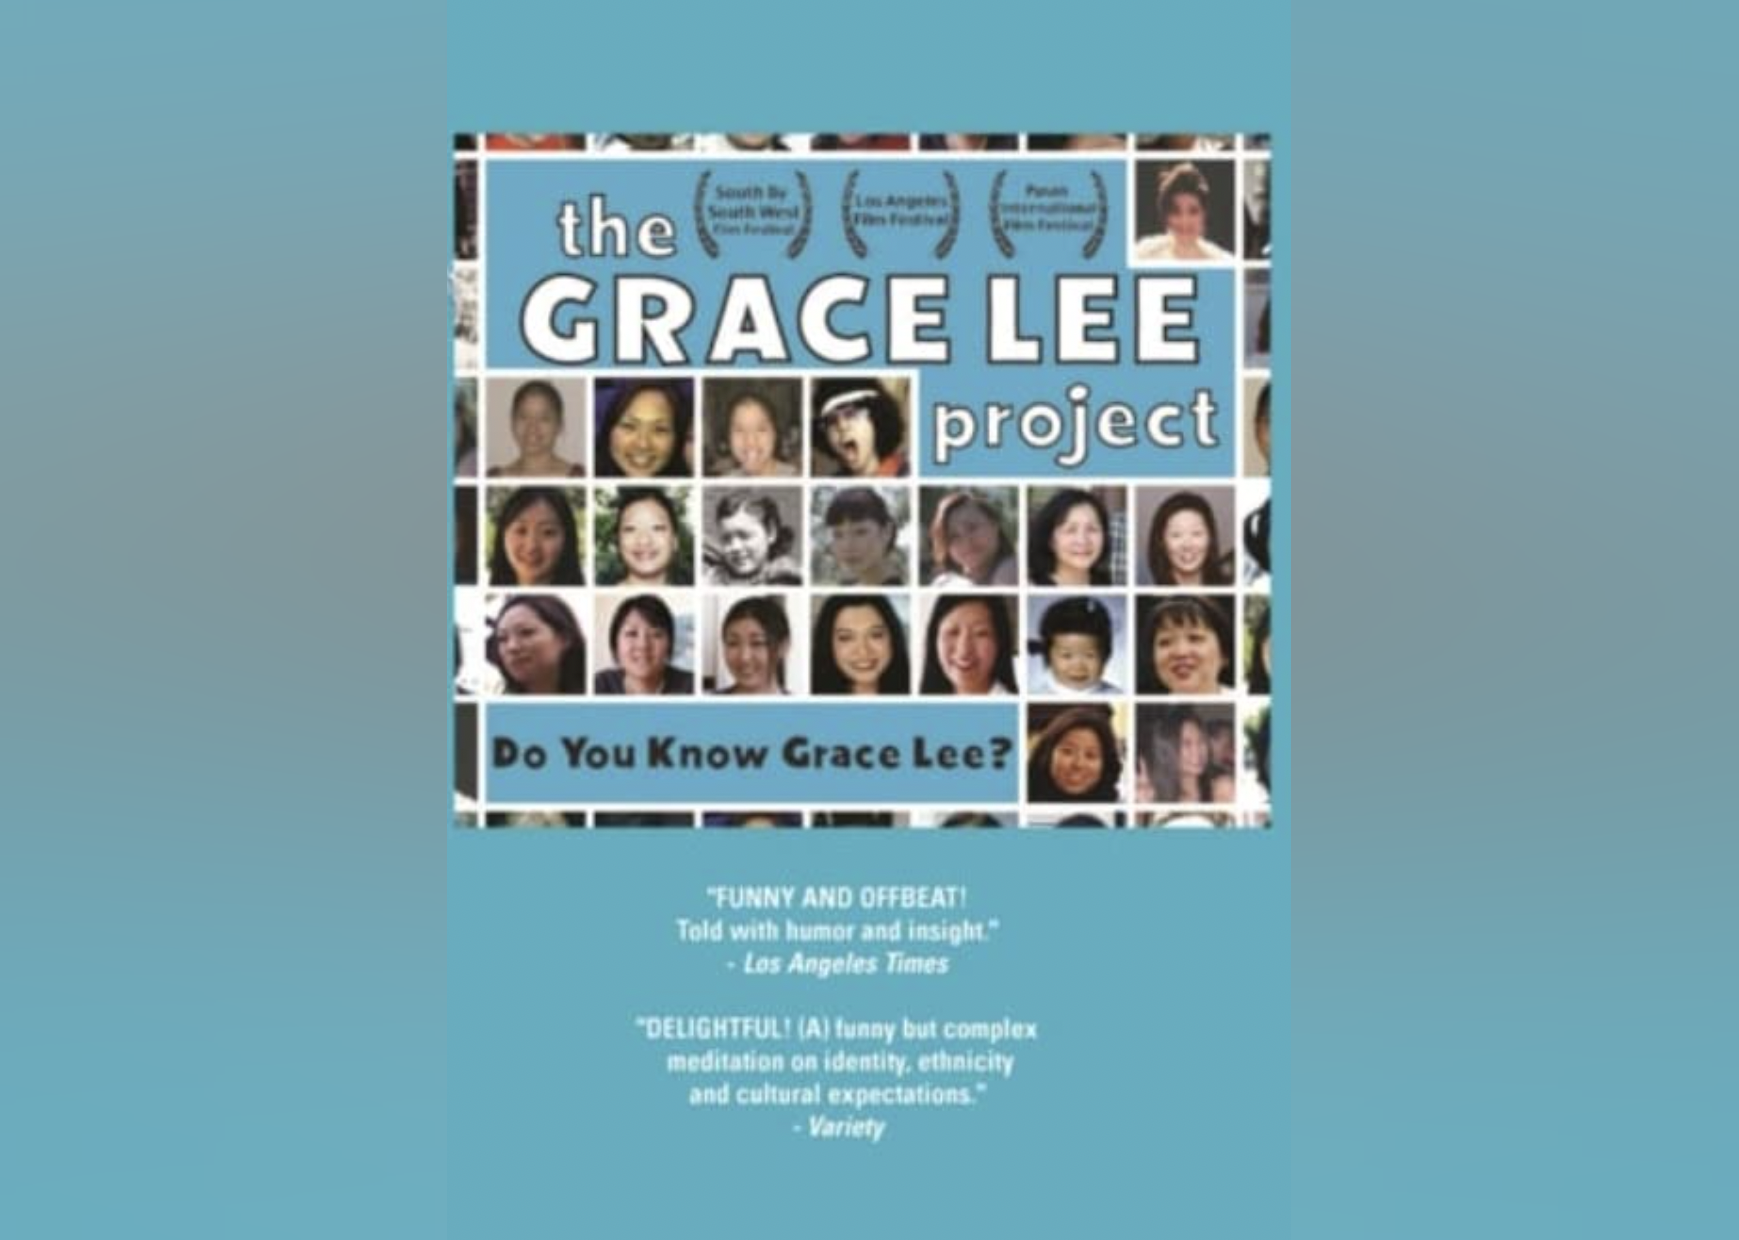 Promotional poster from the film "The Grace Lee Project."